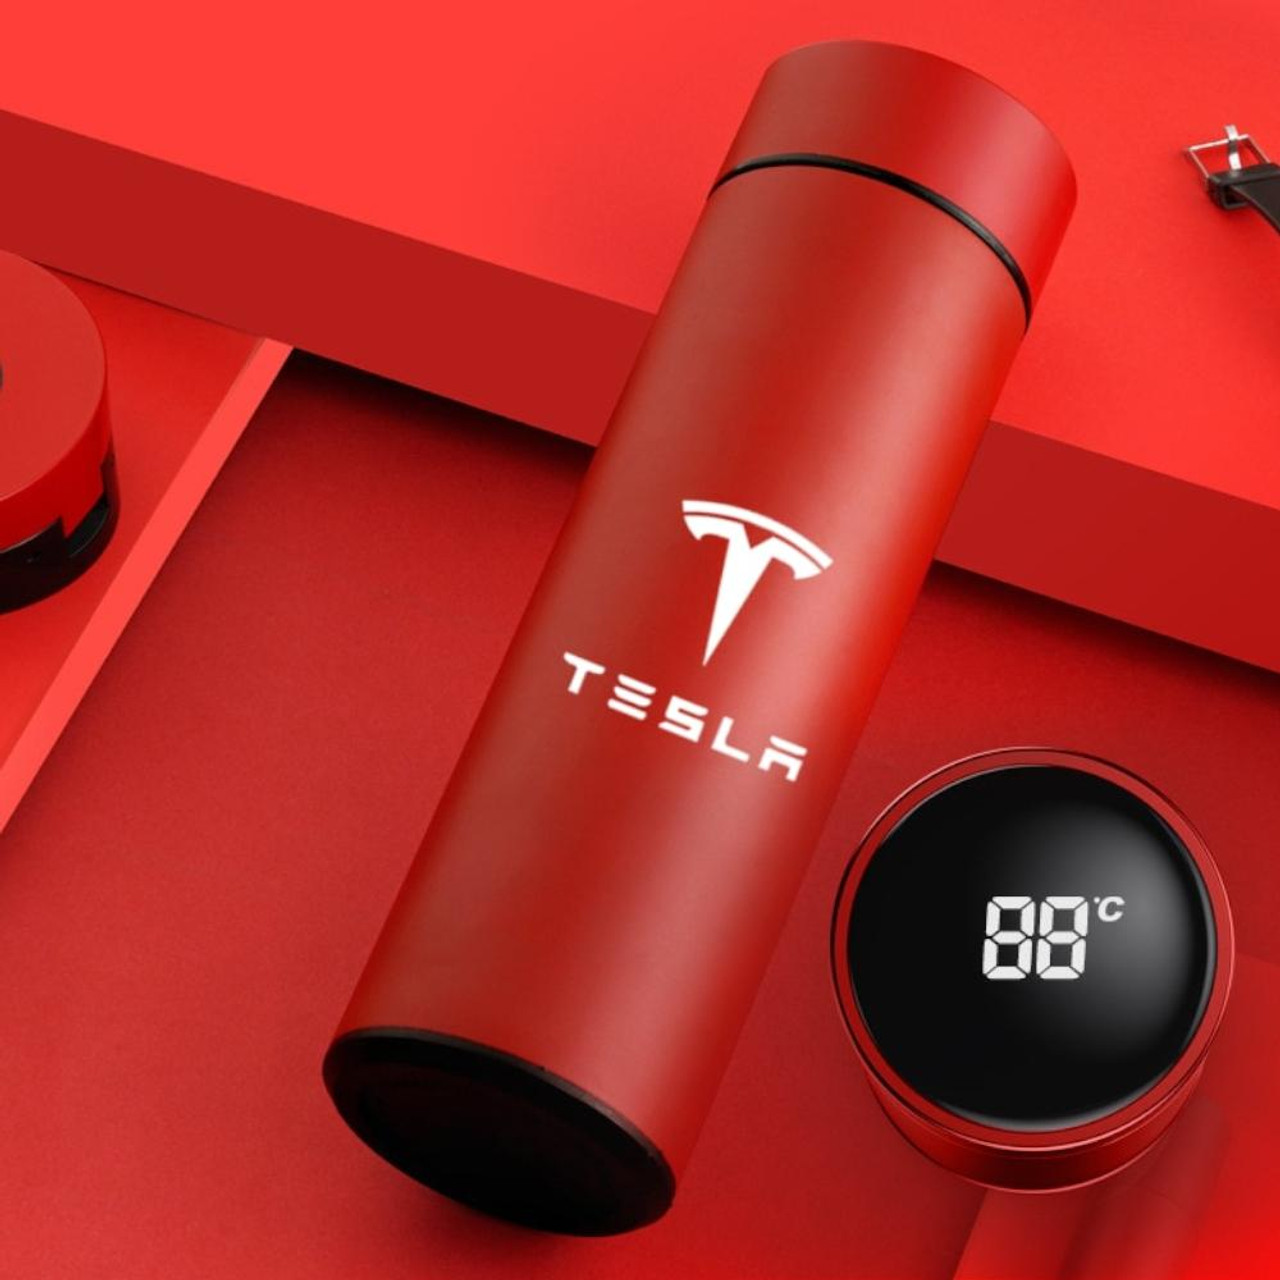 Tesla Logo Thermos Bottle Stainless Steel 500ml Thermal Cup °C Display